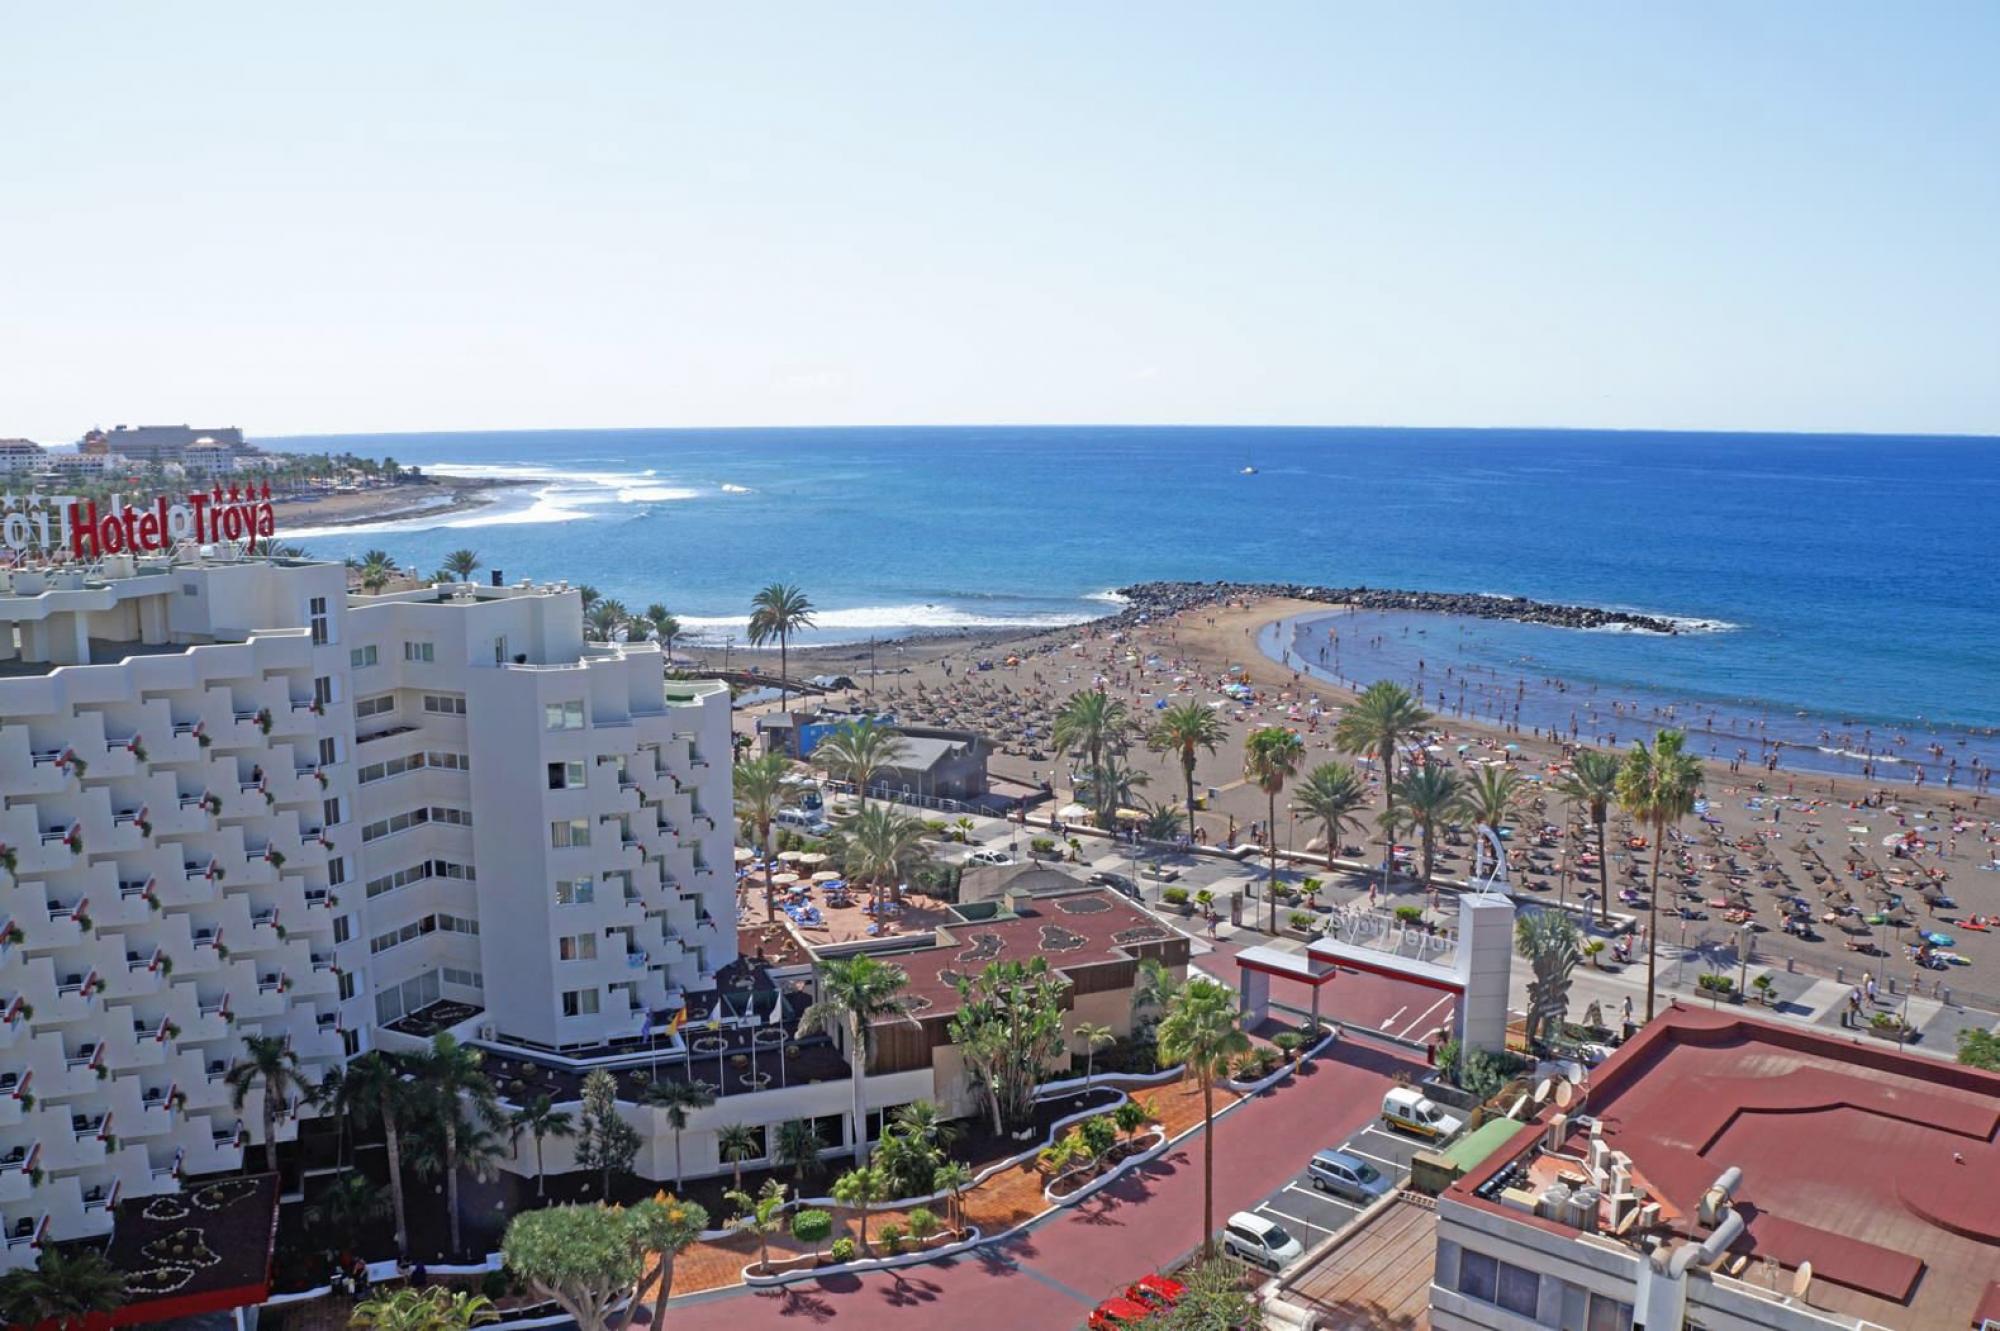 View Hotel Troya's picturesque sea view within magnificent Tenerife.